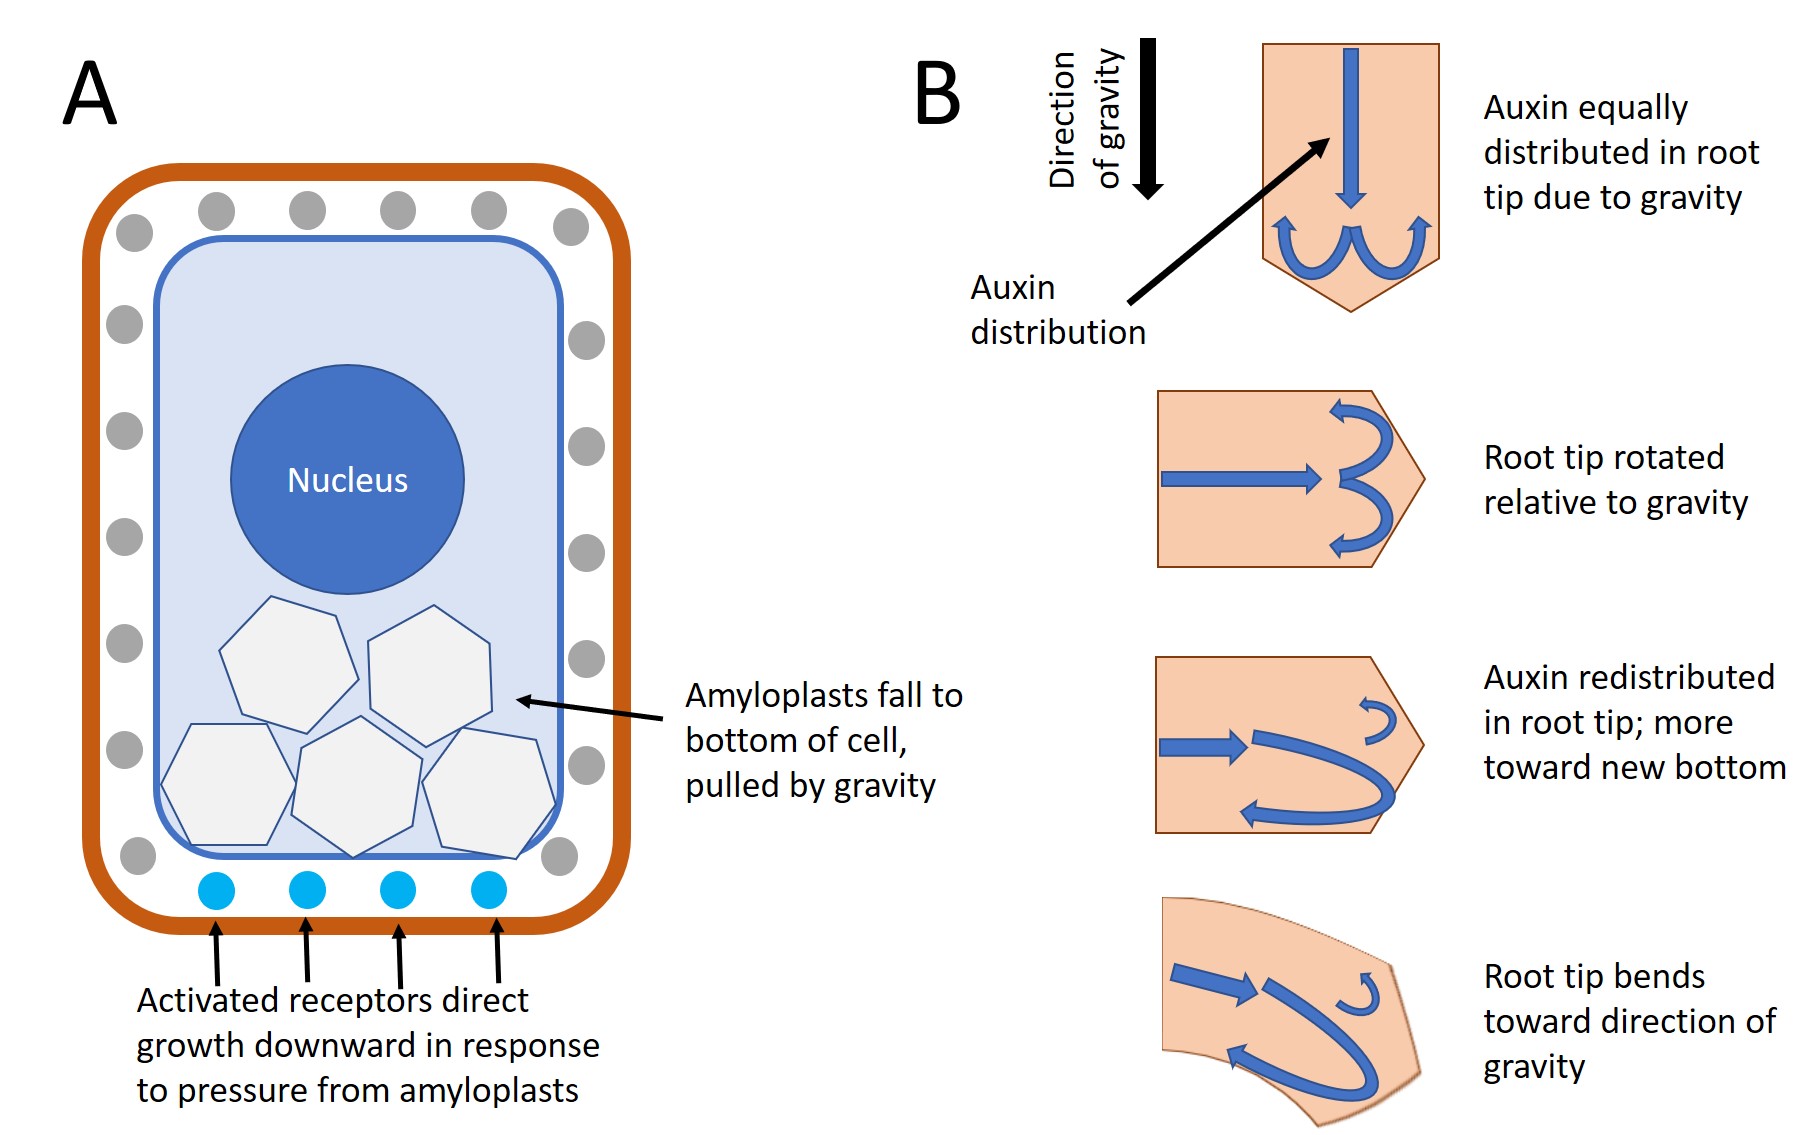 Specialized amyloplasts called statoliths alter auxin distribution, resulting in gravitropism.